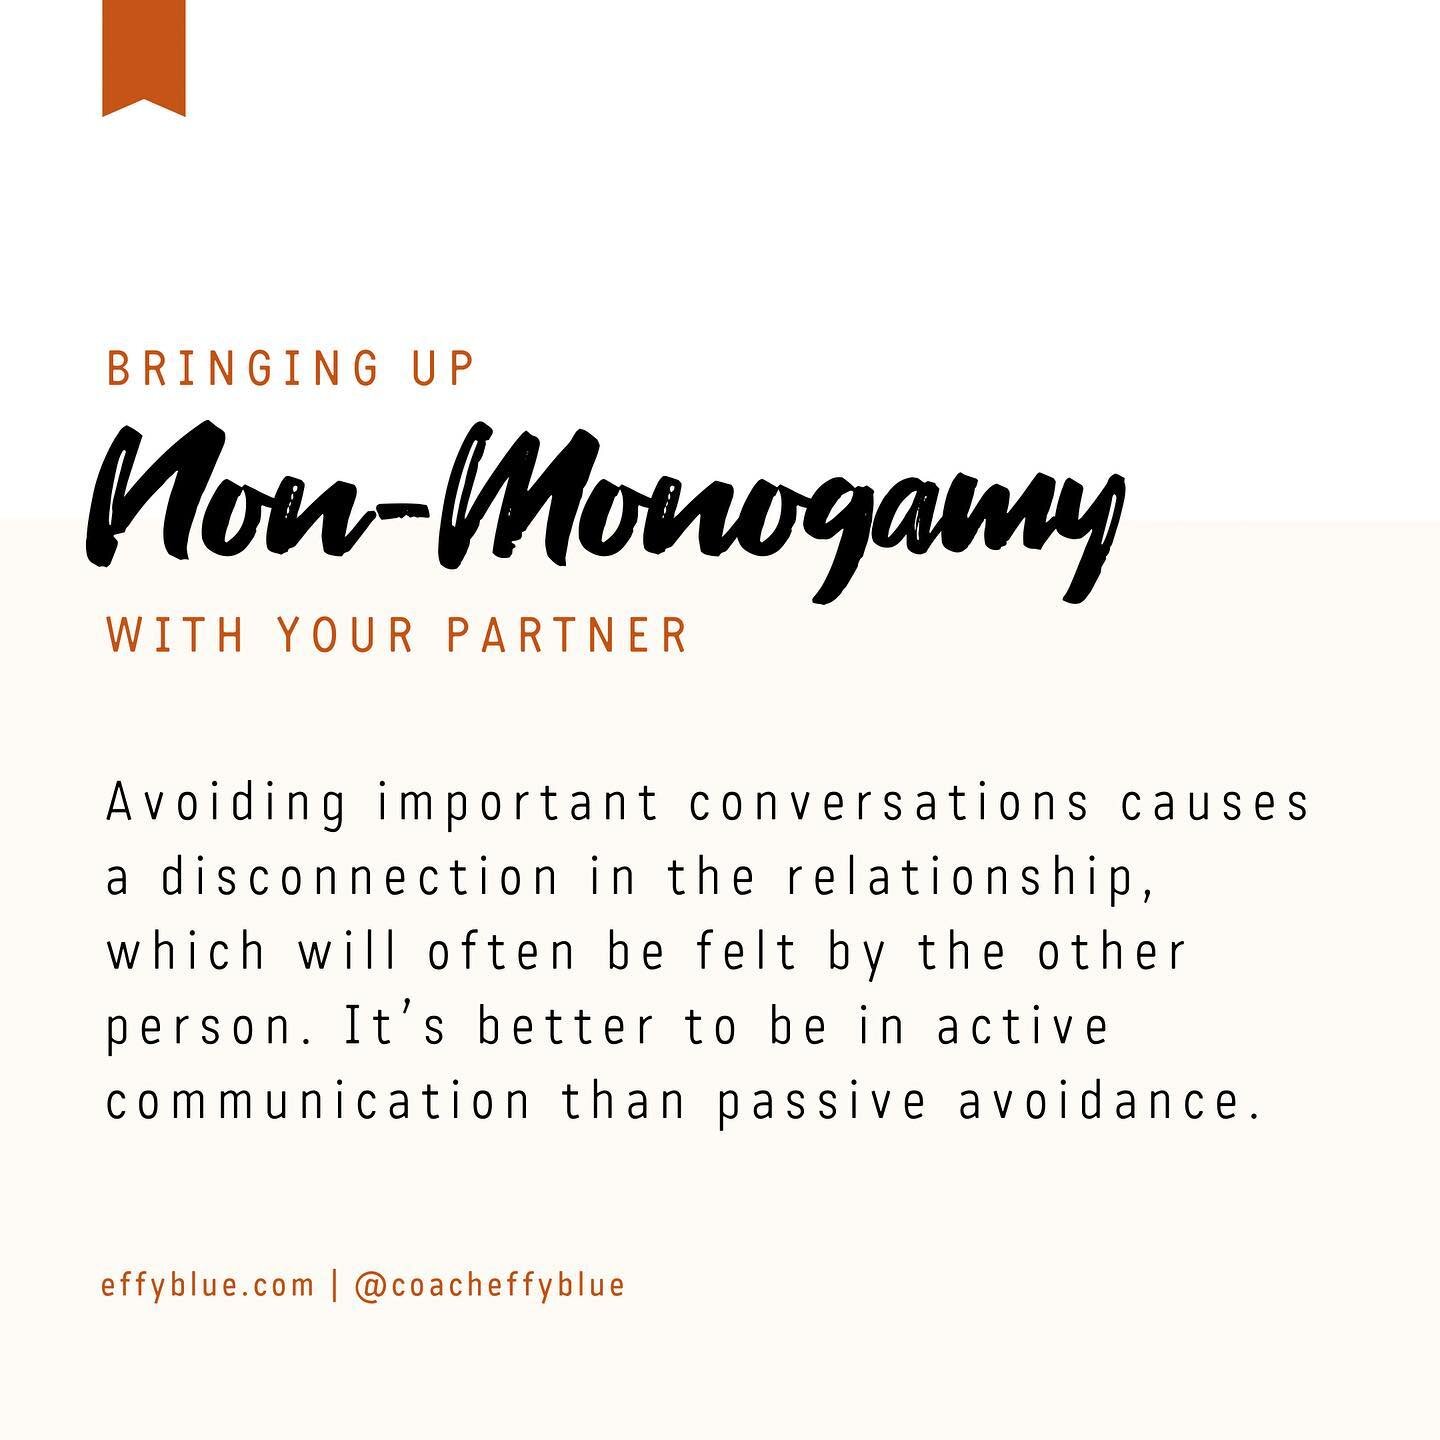 * Bringing up non-monogamy with your partner:
Avoiding important conversations causes a disconnection in the relationship, which will often be felt by the other person. It&rsquo;s better to be in active communication than passive avoidance. 🗣